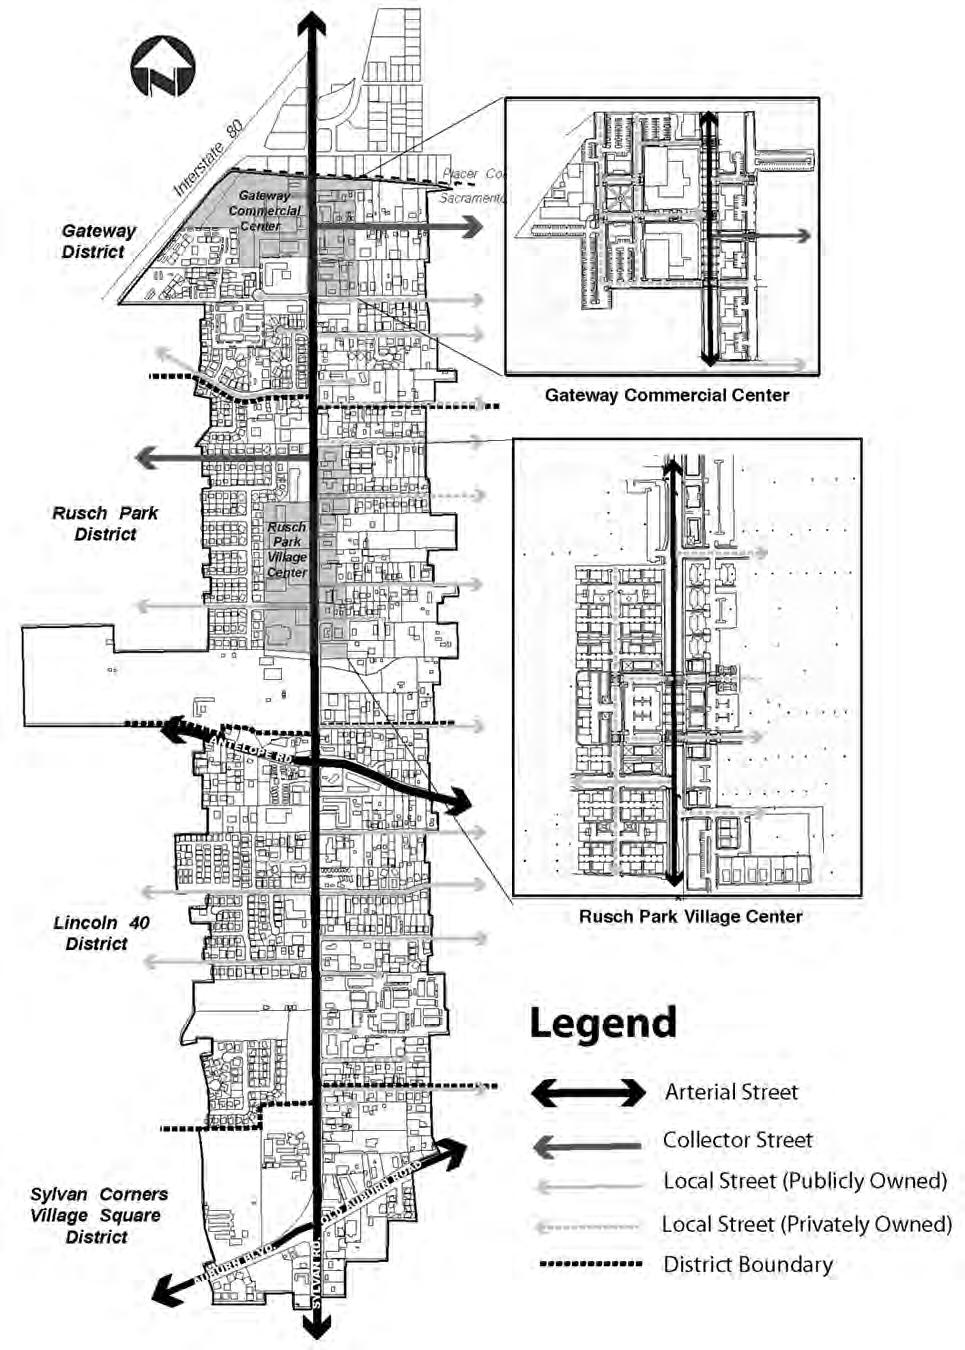 Development Standards Right: This diagram identifies roadway types that relate to dimensional